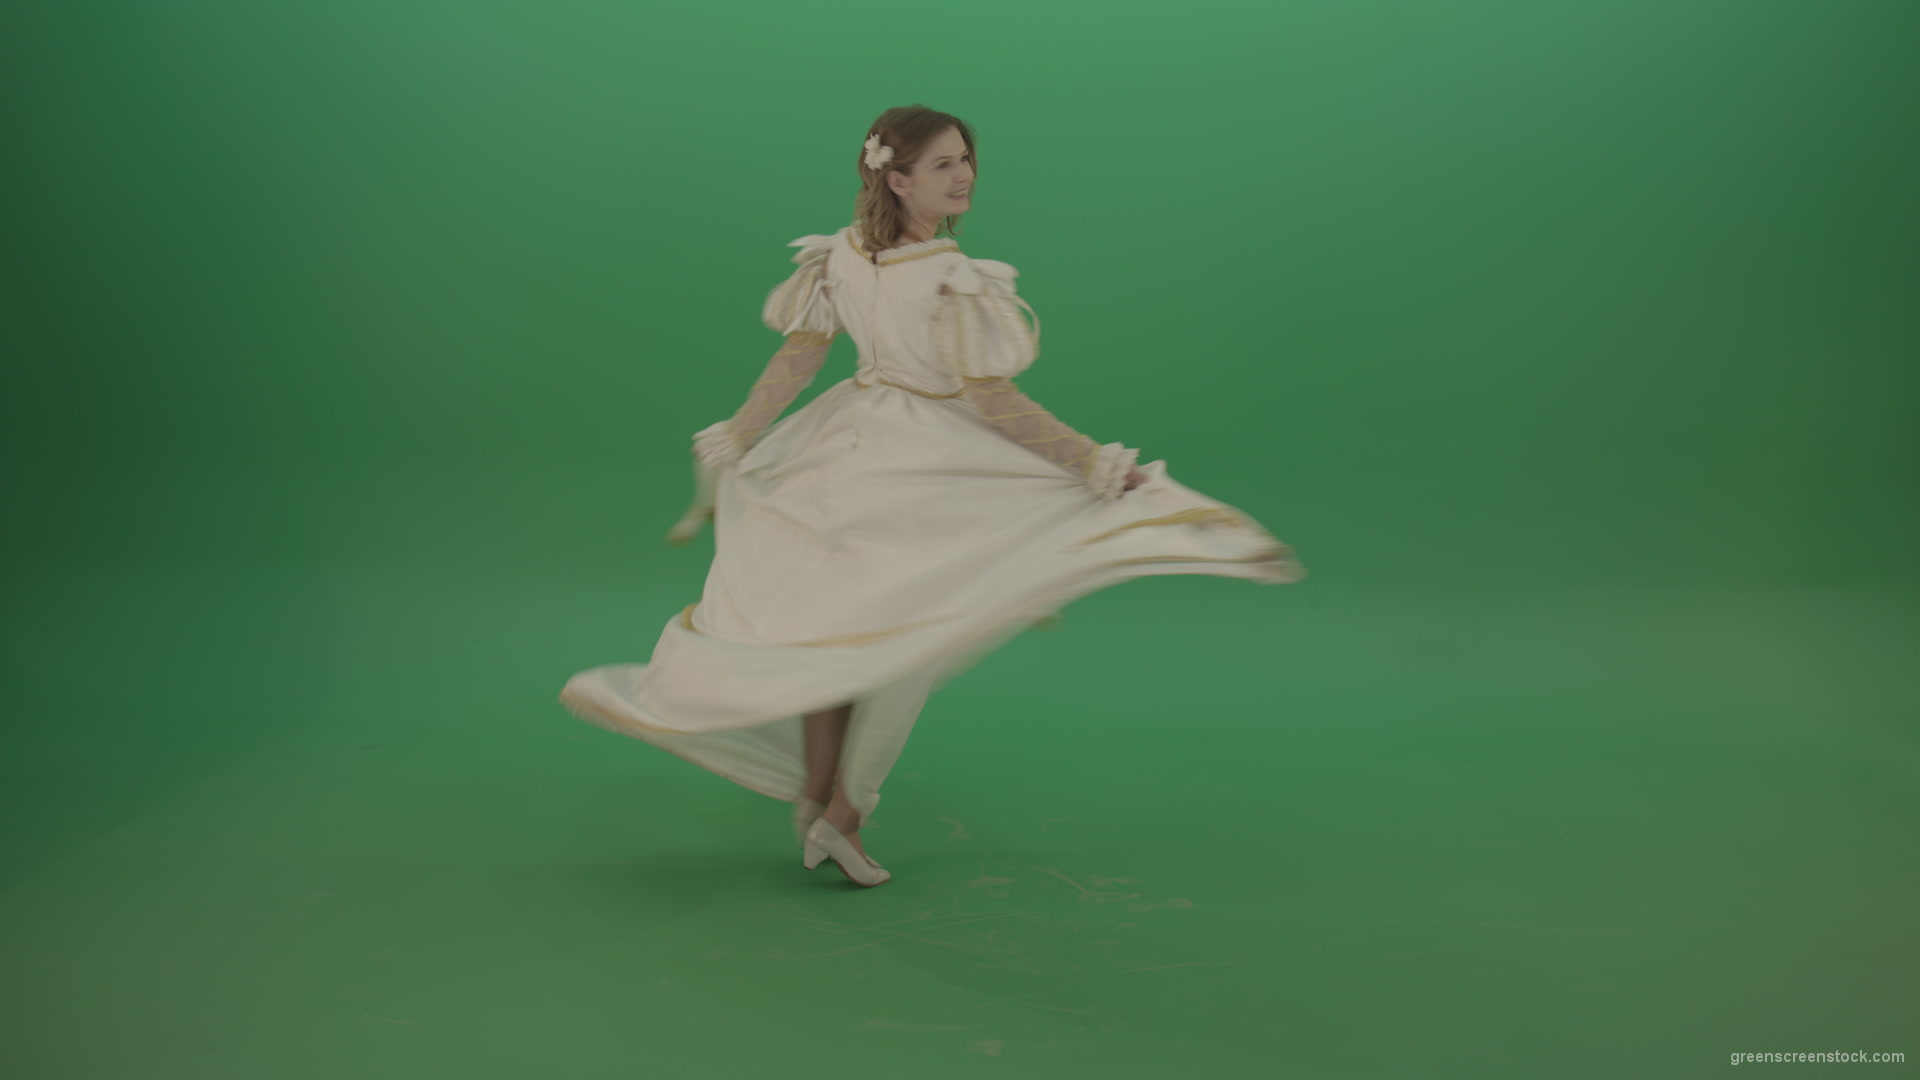 Princess-dances-twisting-around-the-circle-isolated-on-chromakey-background_004 Green Screen Stock